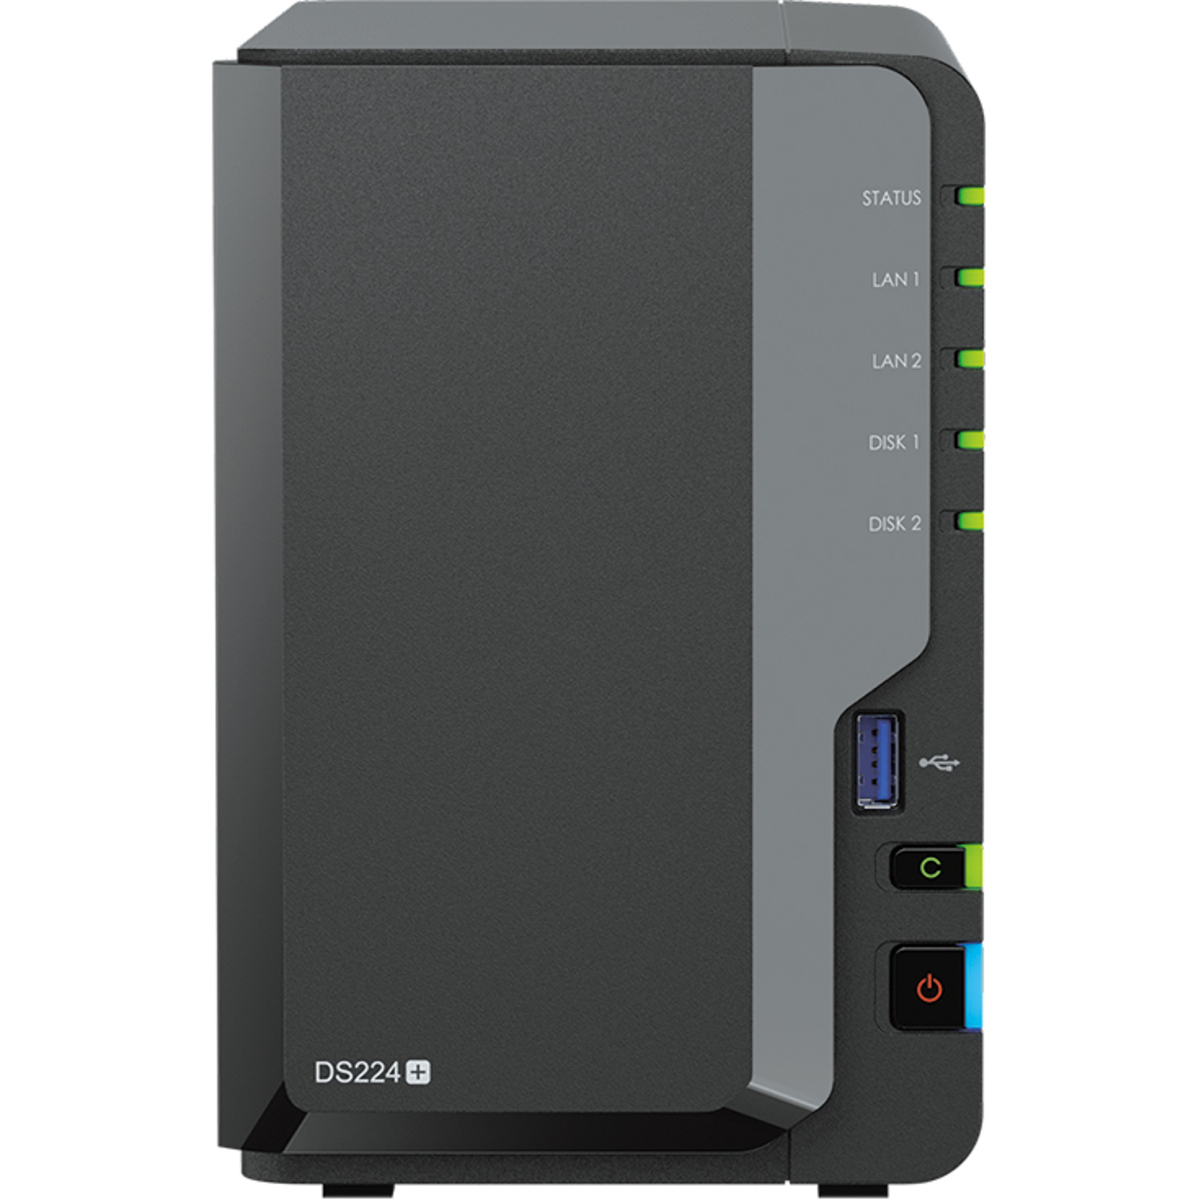 Synology DiskStation DS224+ 8tb 2-Bay Desktop Personal / Basic Home / Small Office NAS - Network Attached Storage Device 2x4tb Sandisk Ultra 3D SDSSDH3-4T00 2.5 560/520MB/s SATA 6Gb/s SSD CONSUMER Class Drives Installed - Burn-In Tested - ON SALE - FREE RAM UPGRADE DiskStation DS224+